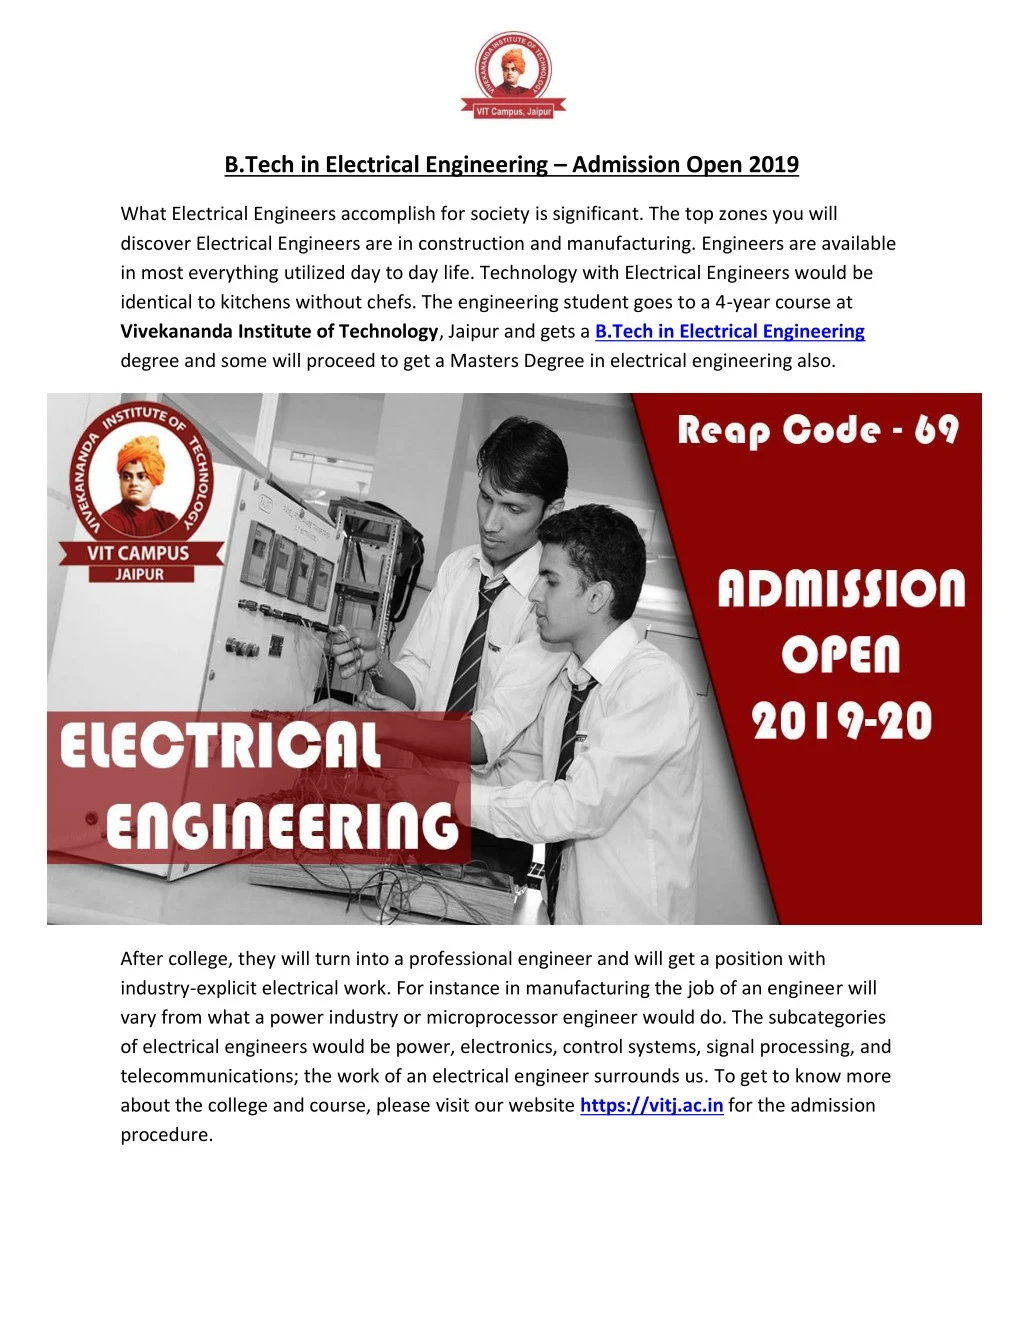 b tech in electrical engineering admission open